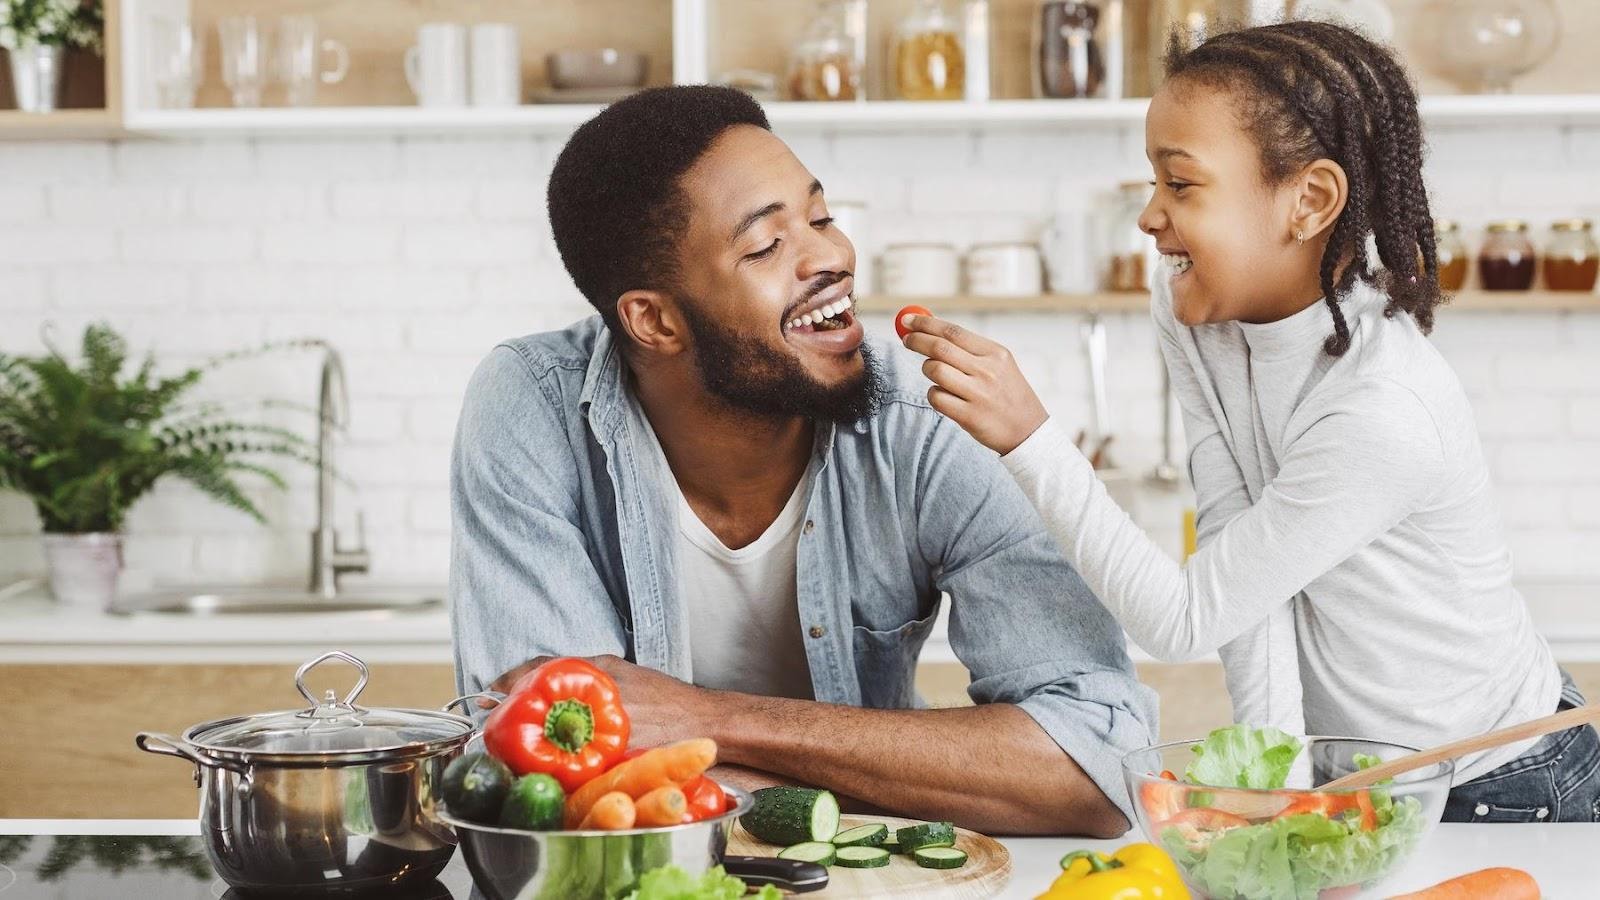 A father and his daughter in the kitchen eating vegetables jovially